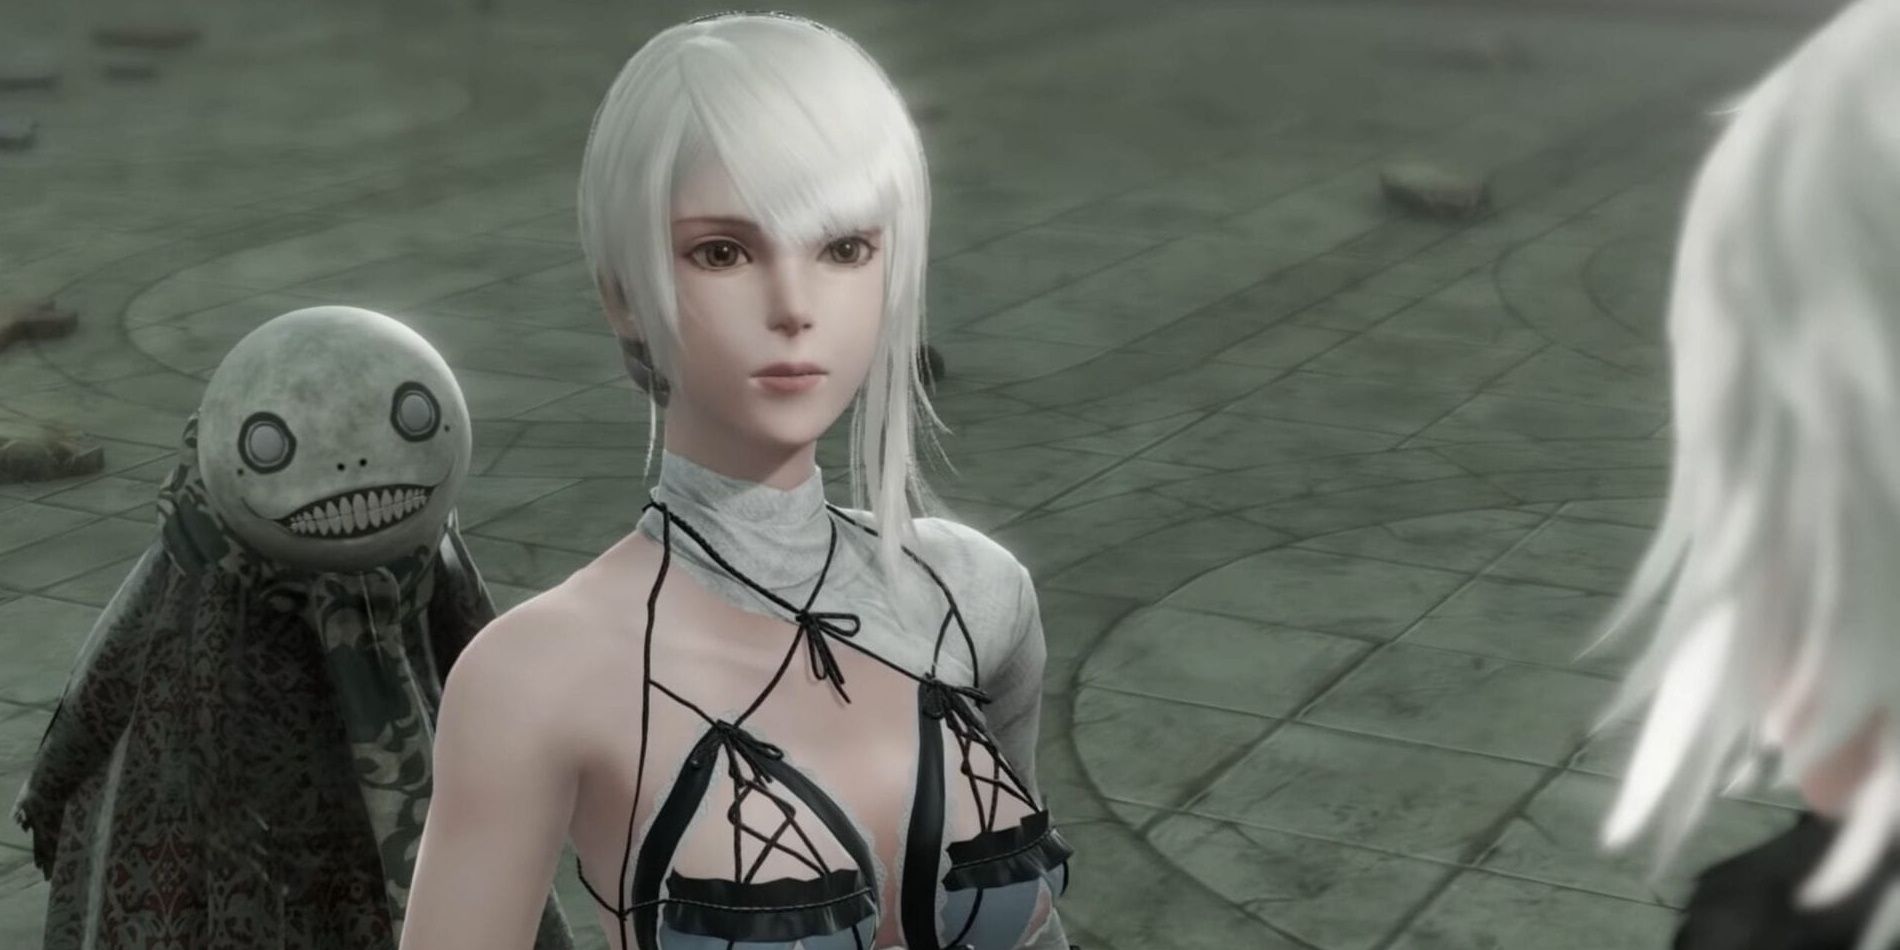 Nier Replicant Fans Already Fixing Problematic PC Port Issues